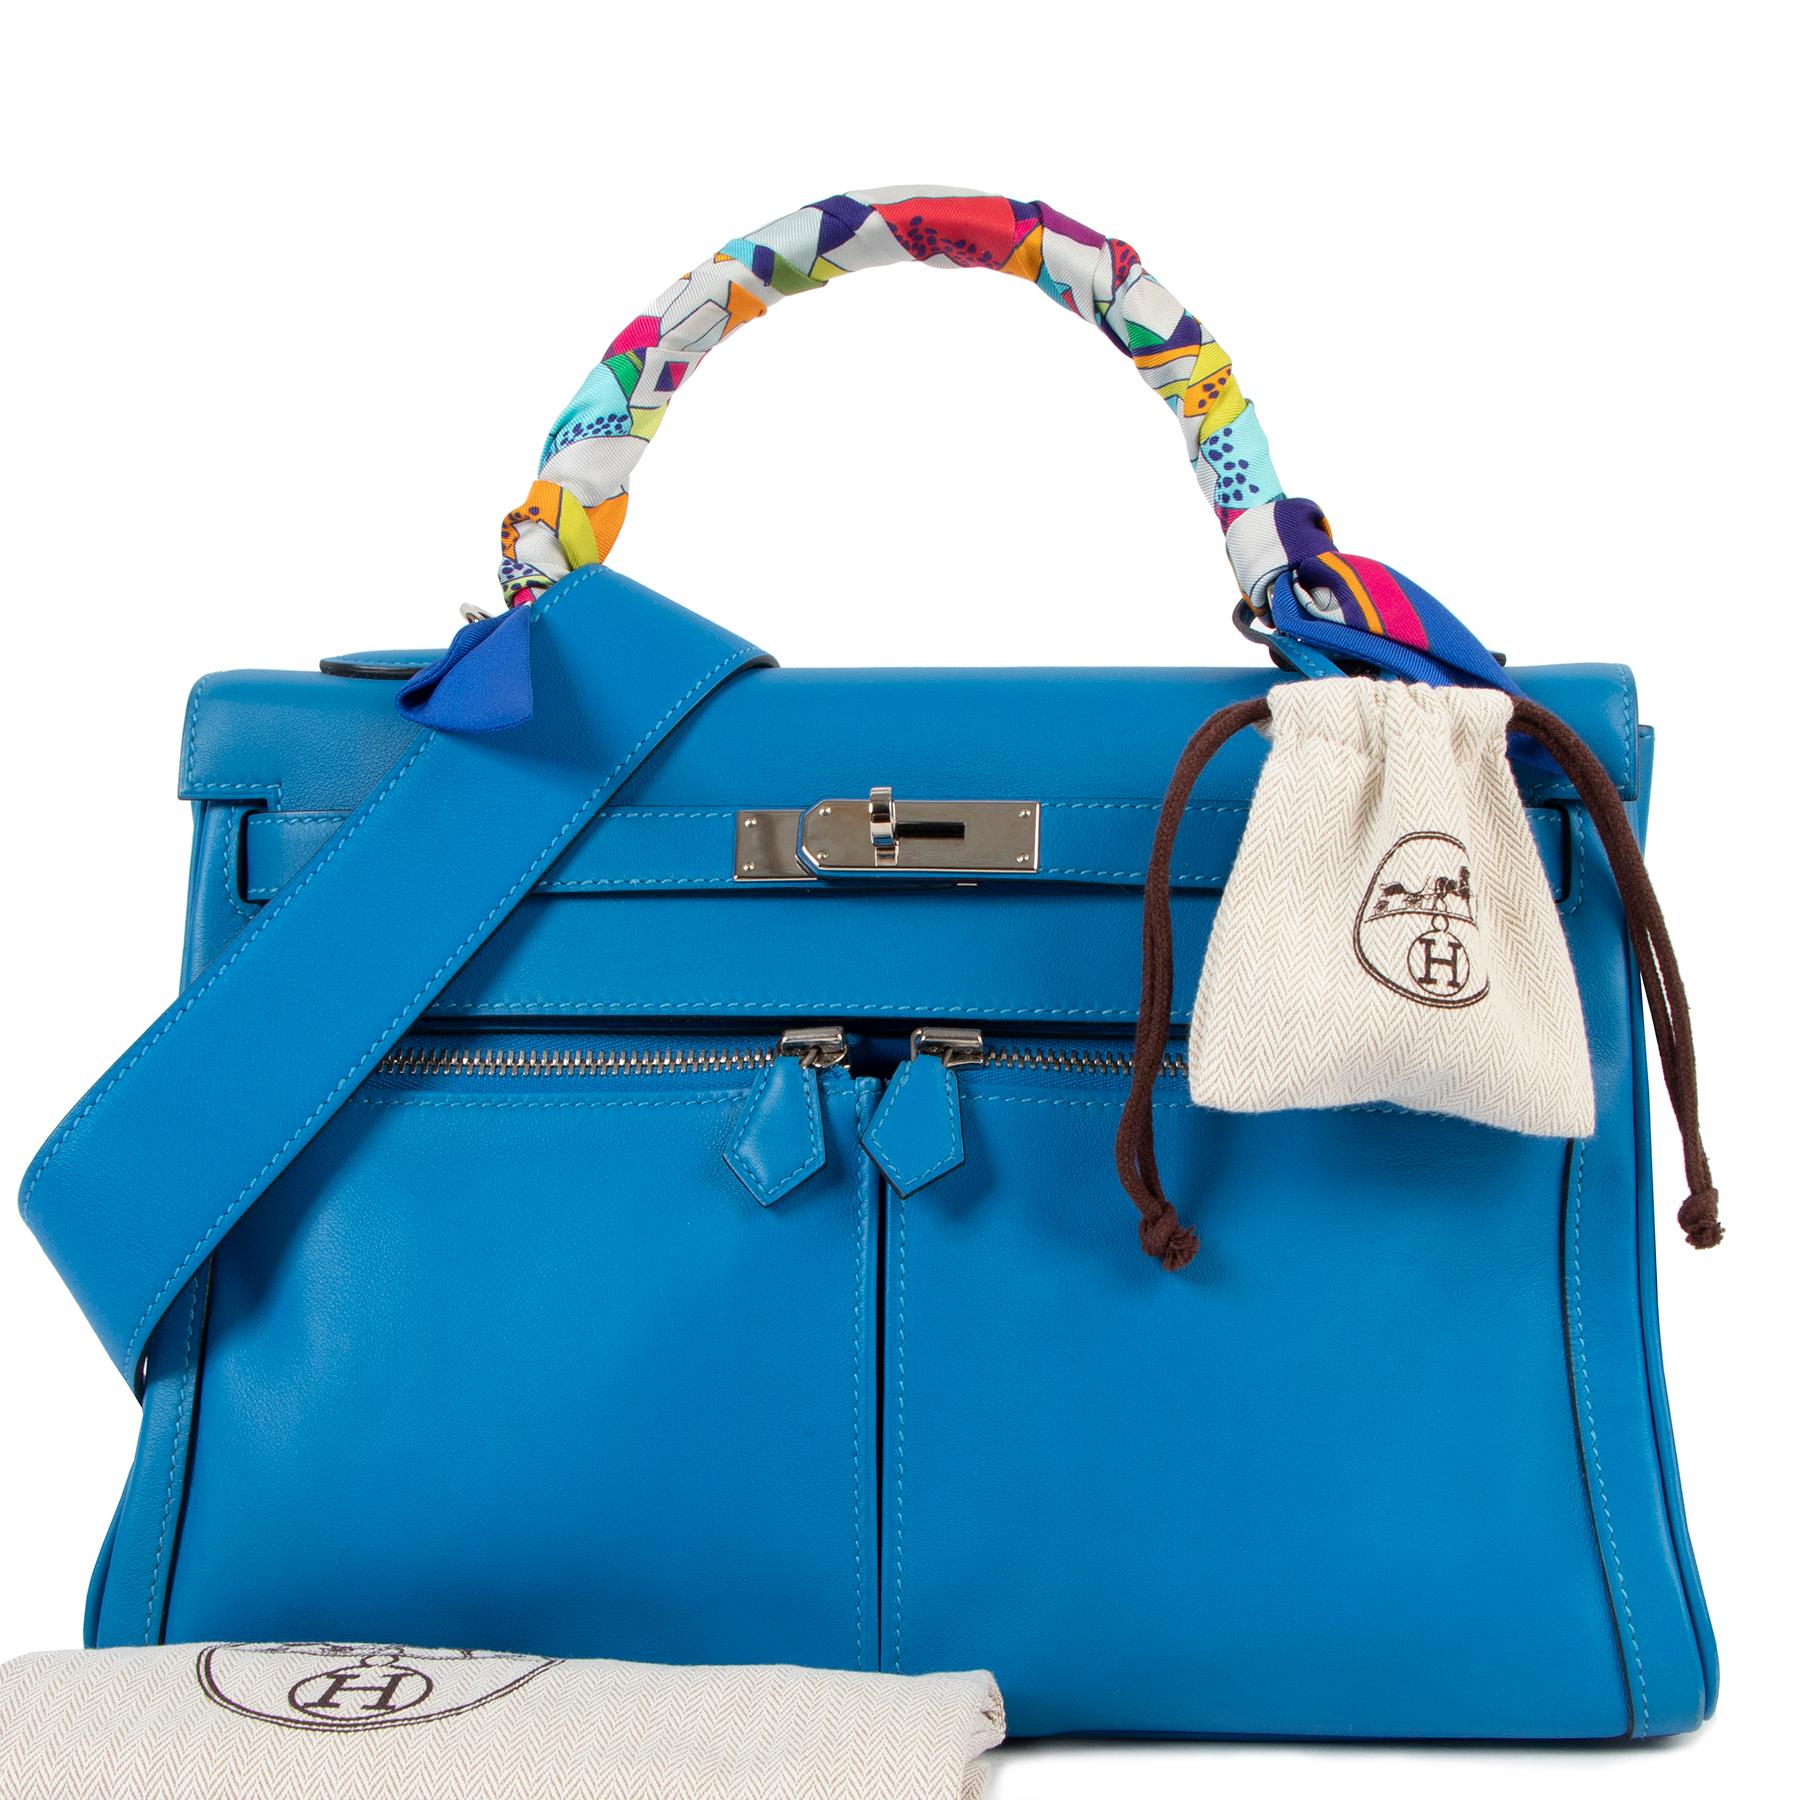 Hermès HSS Kelly 32 Lakis Bleu Hydra Swift PHW

Made to measure! This special-order Hermès Kelly Lakis disguitished itself by the horseshoe stamp.

Created by the Greek designer Lakis Gavalis in the early 2000's, this reimagined Kelly bag expodes